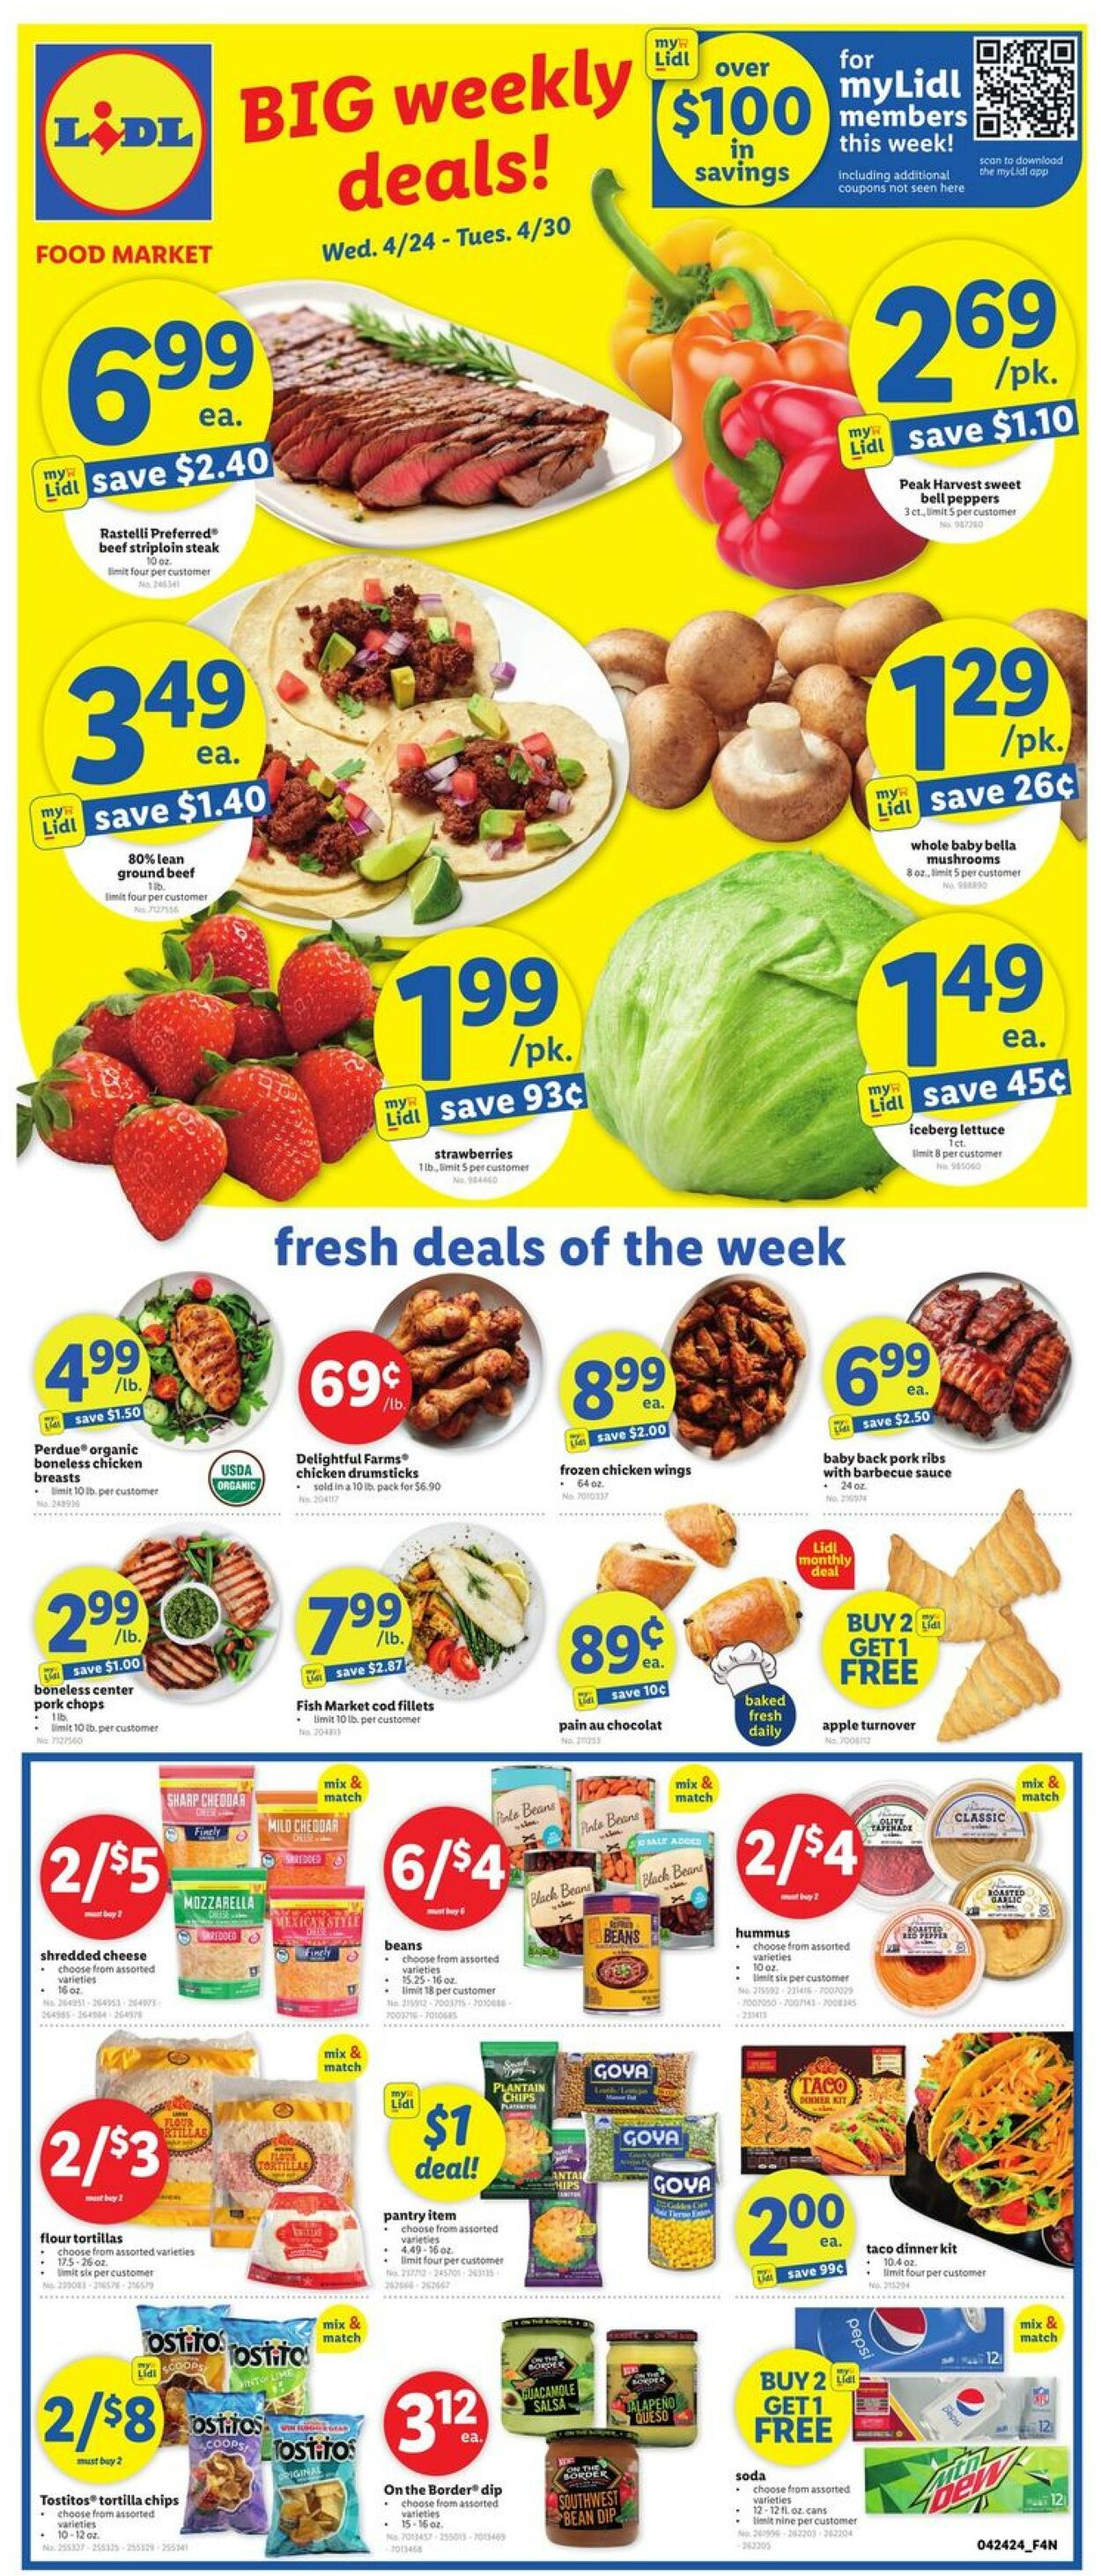 Lidl Promotional weekly ads